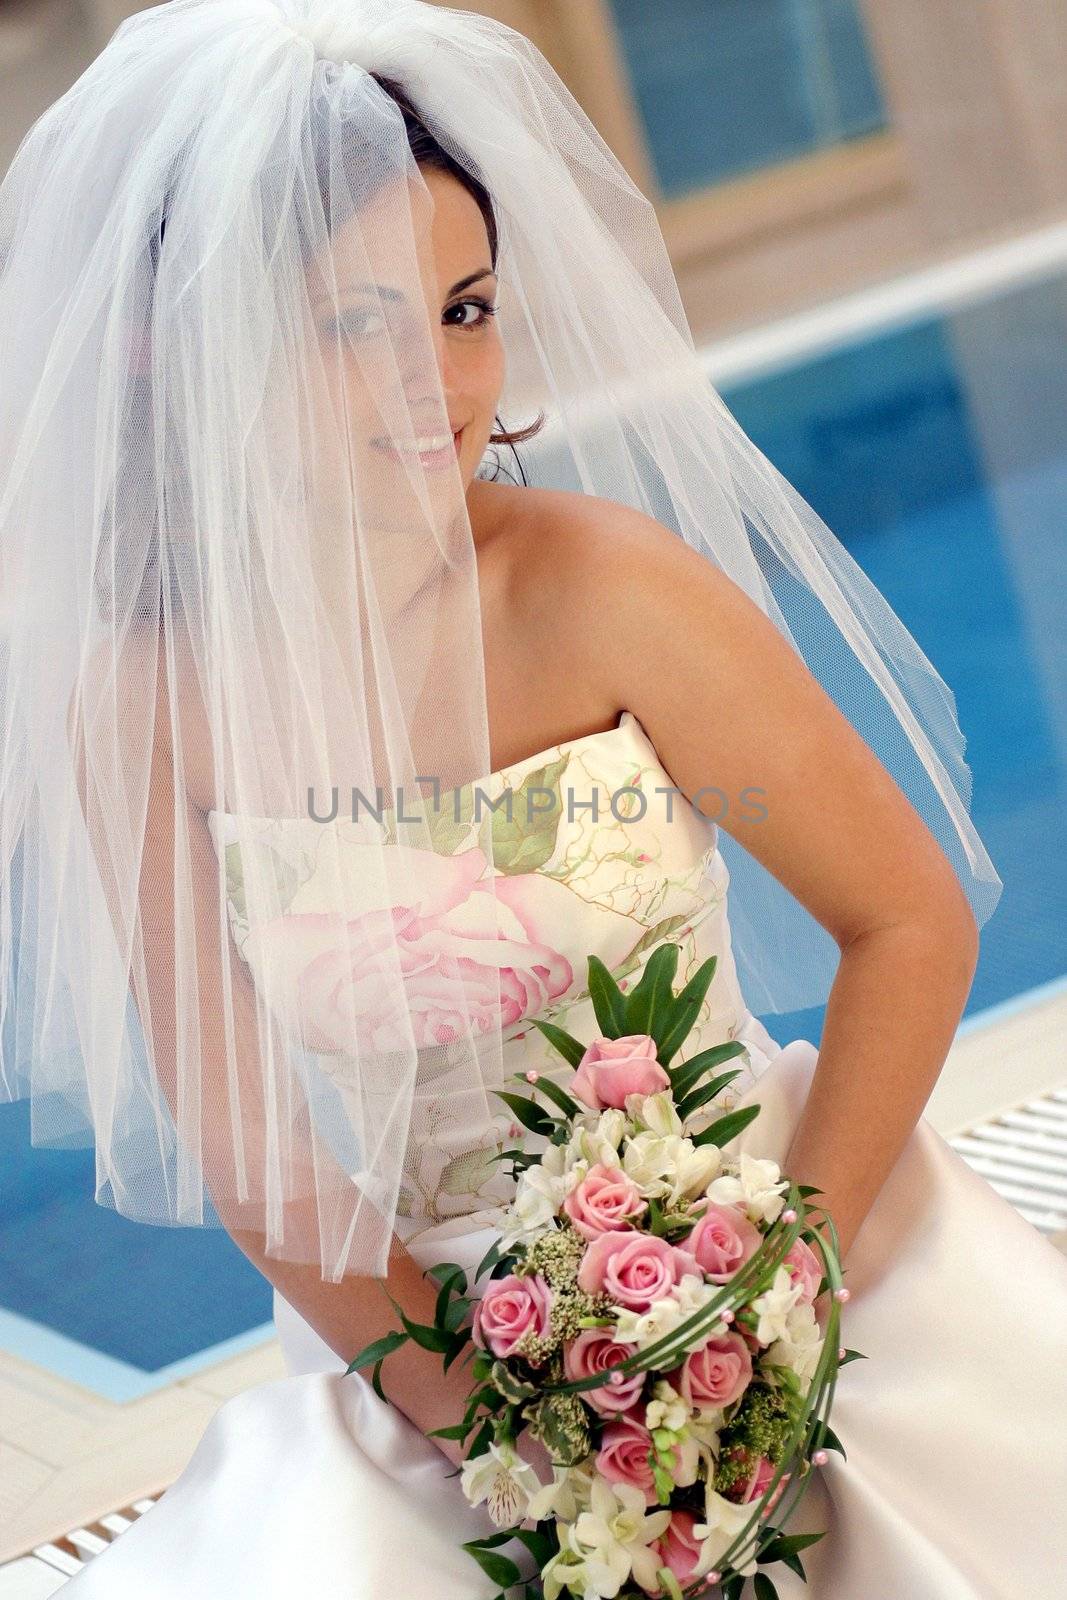 Smiling young bride wearing veiled white dress holding bouquet of flowers.